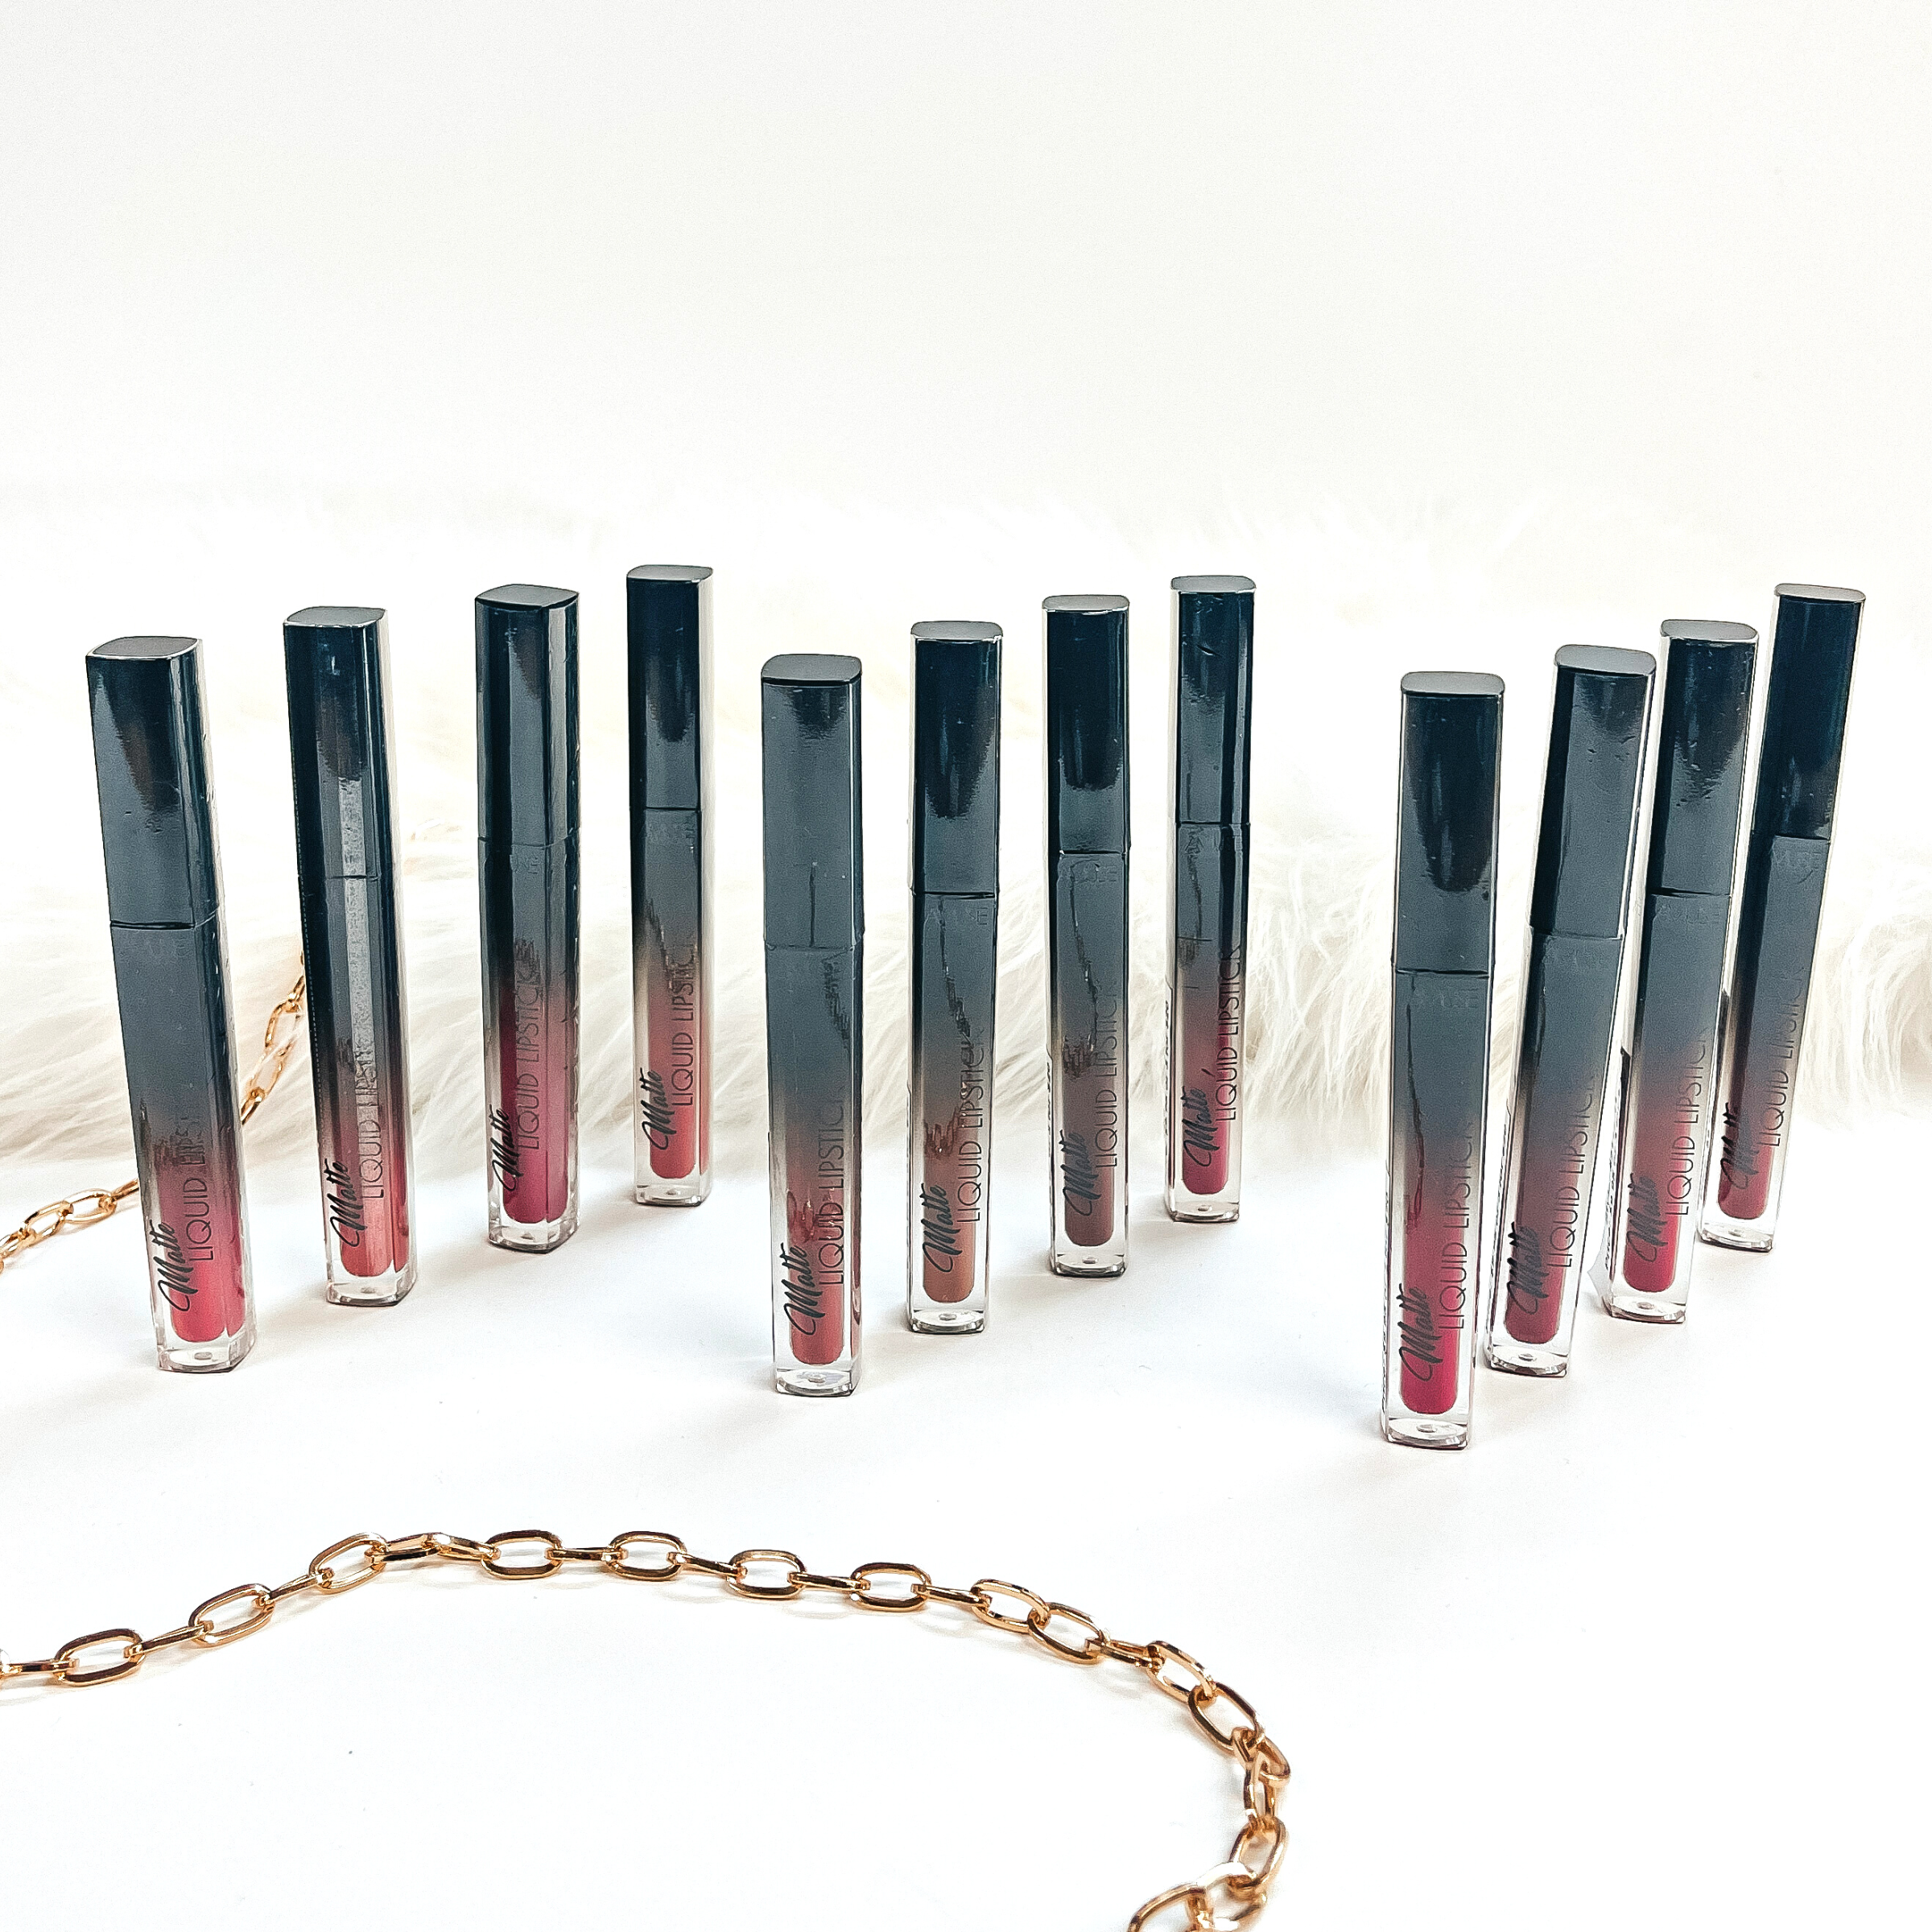 There are twelve liquid lipsticks in different shades of pink/nudes/reds.  These lipsticks are taken in groups of four, making three diagonal rows. They  are taken on a white background with white fur in the back and a gold link chain  as decor.